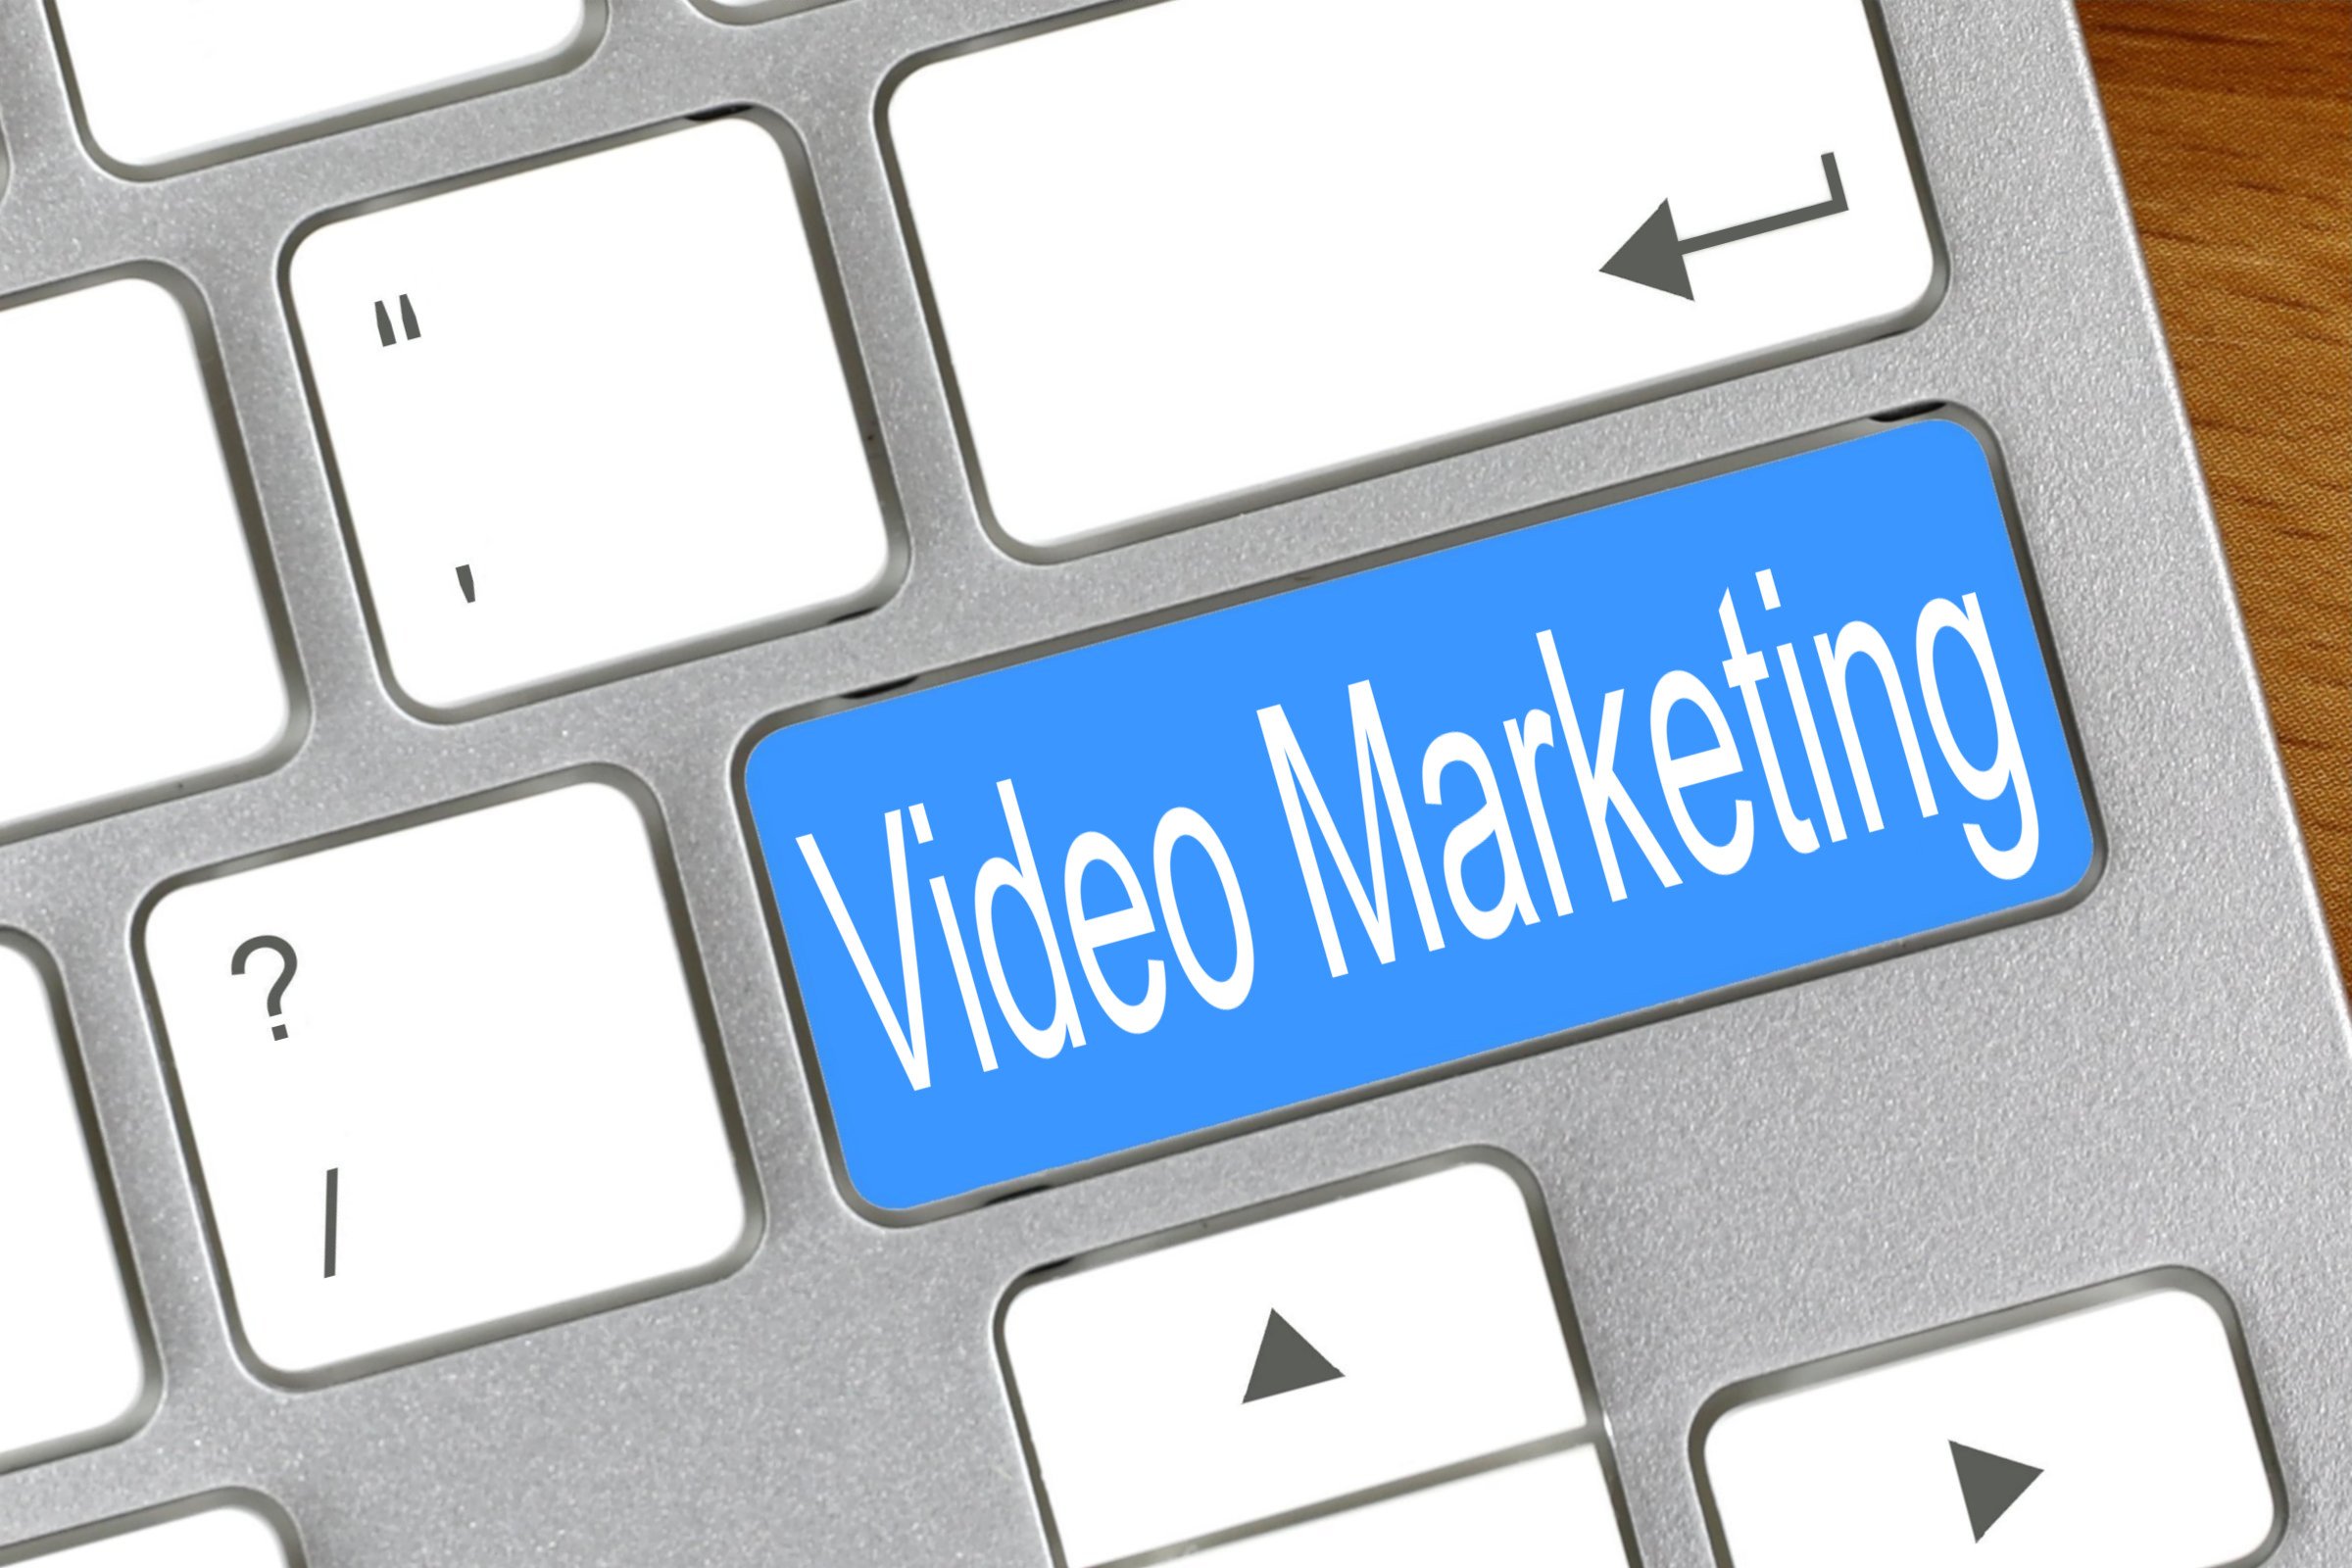 Video Marketing - Free of Charge Creative Commons Keyboard image